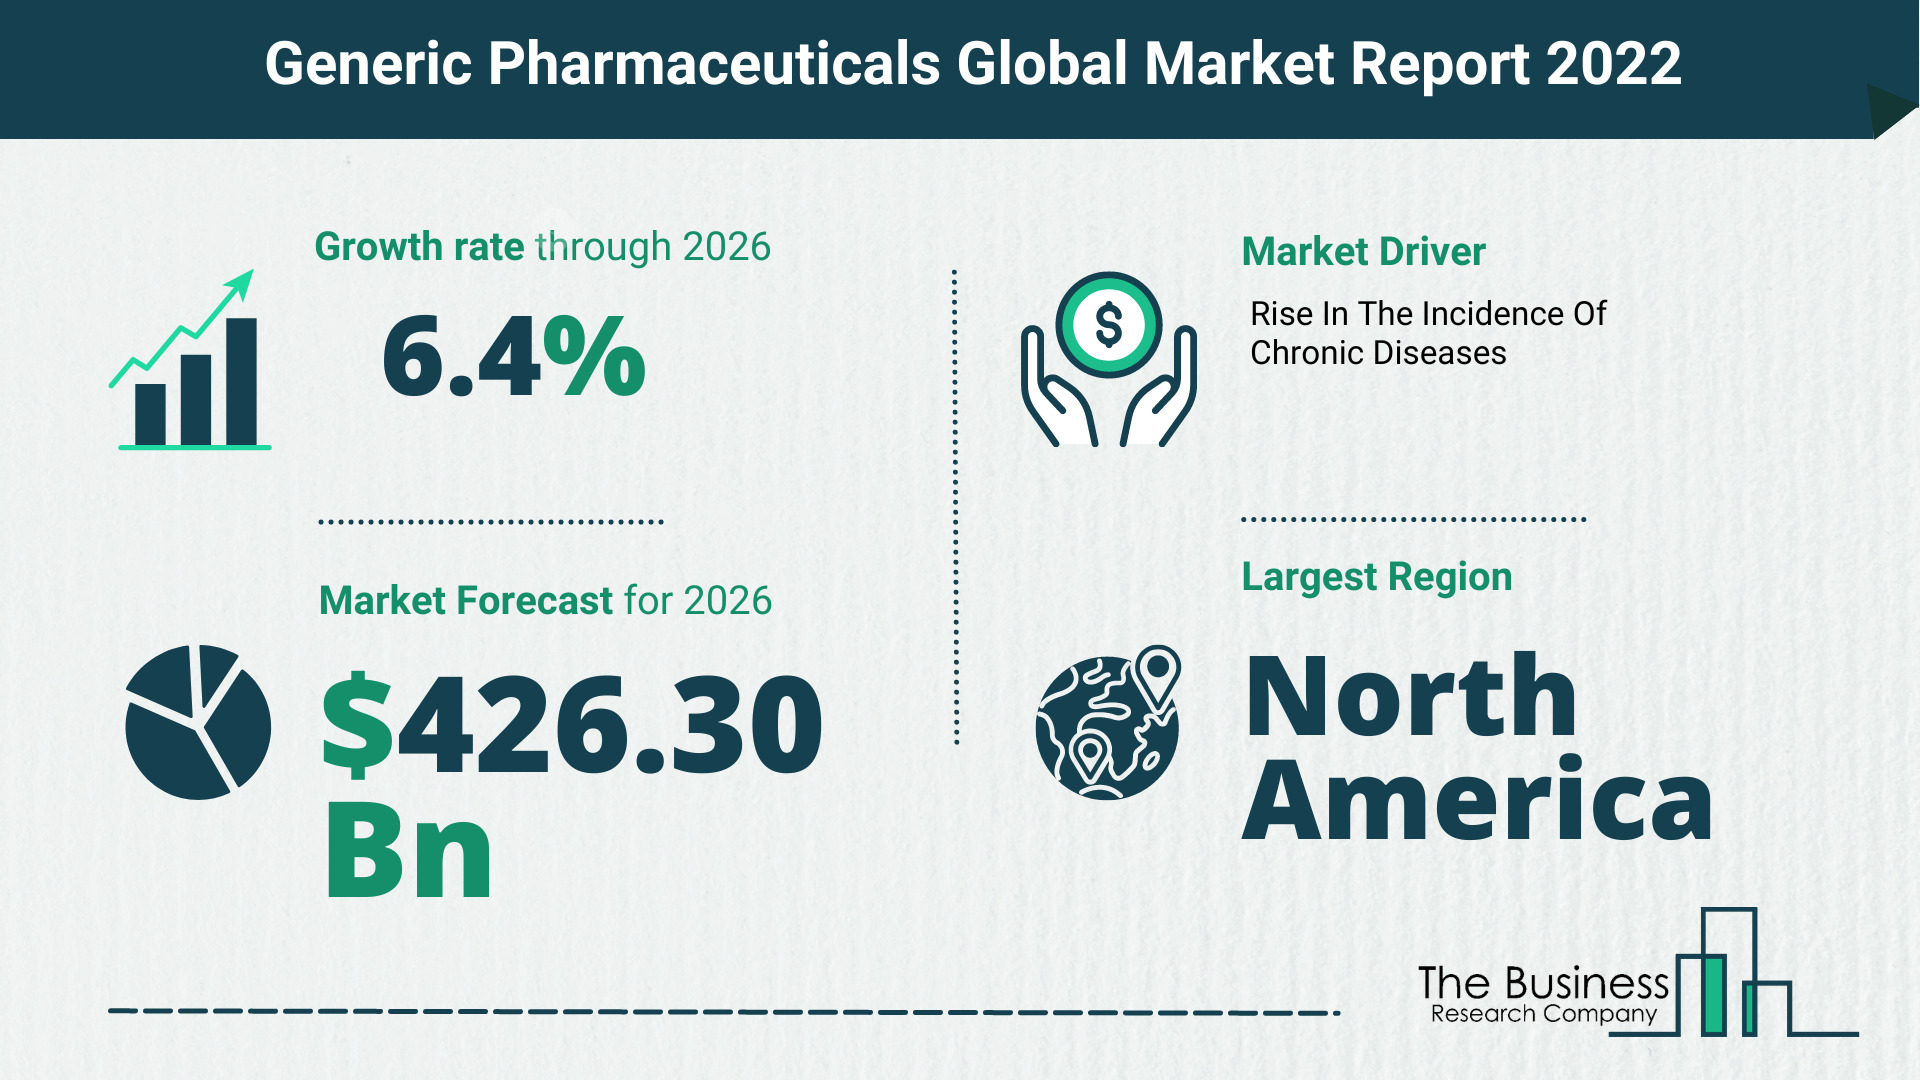 What Is The Generic Pharmaceuticals Market Overview In 2022?